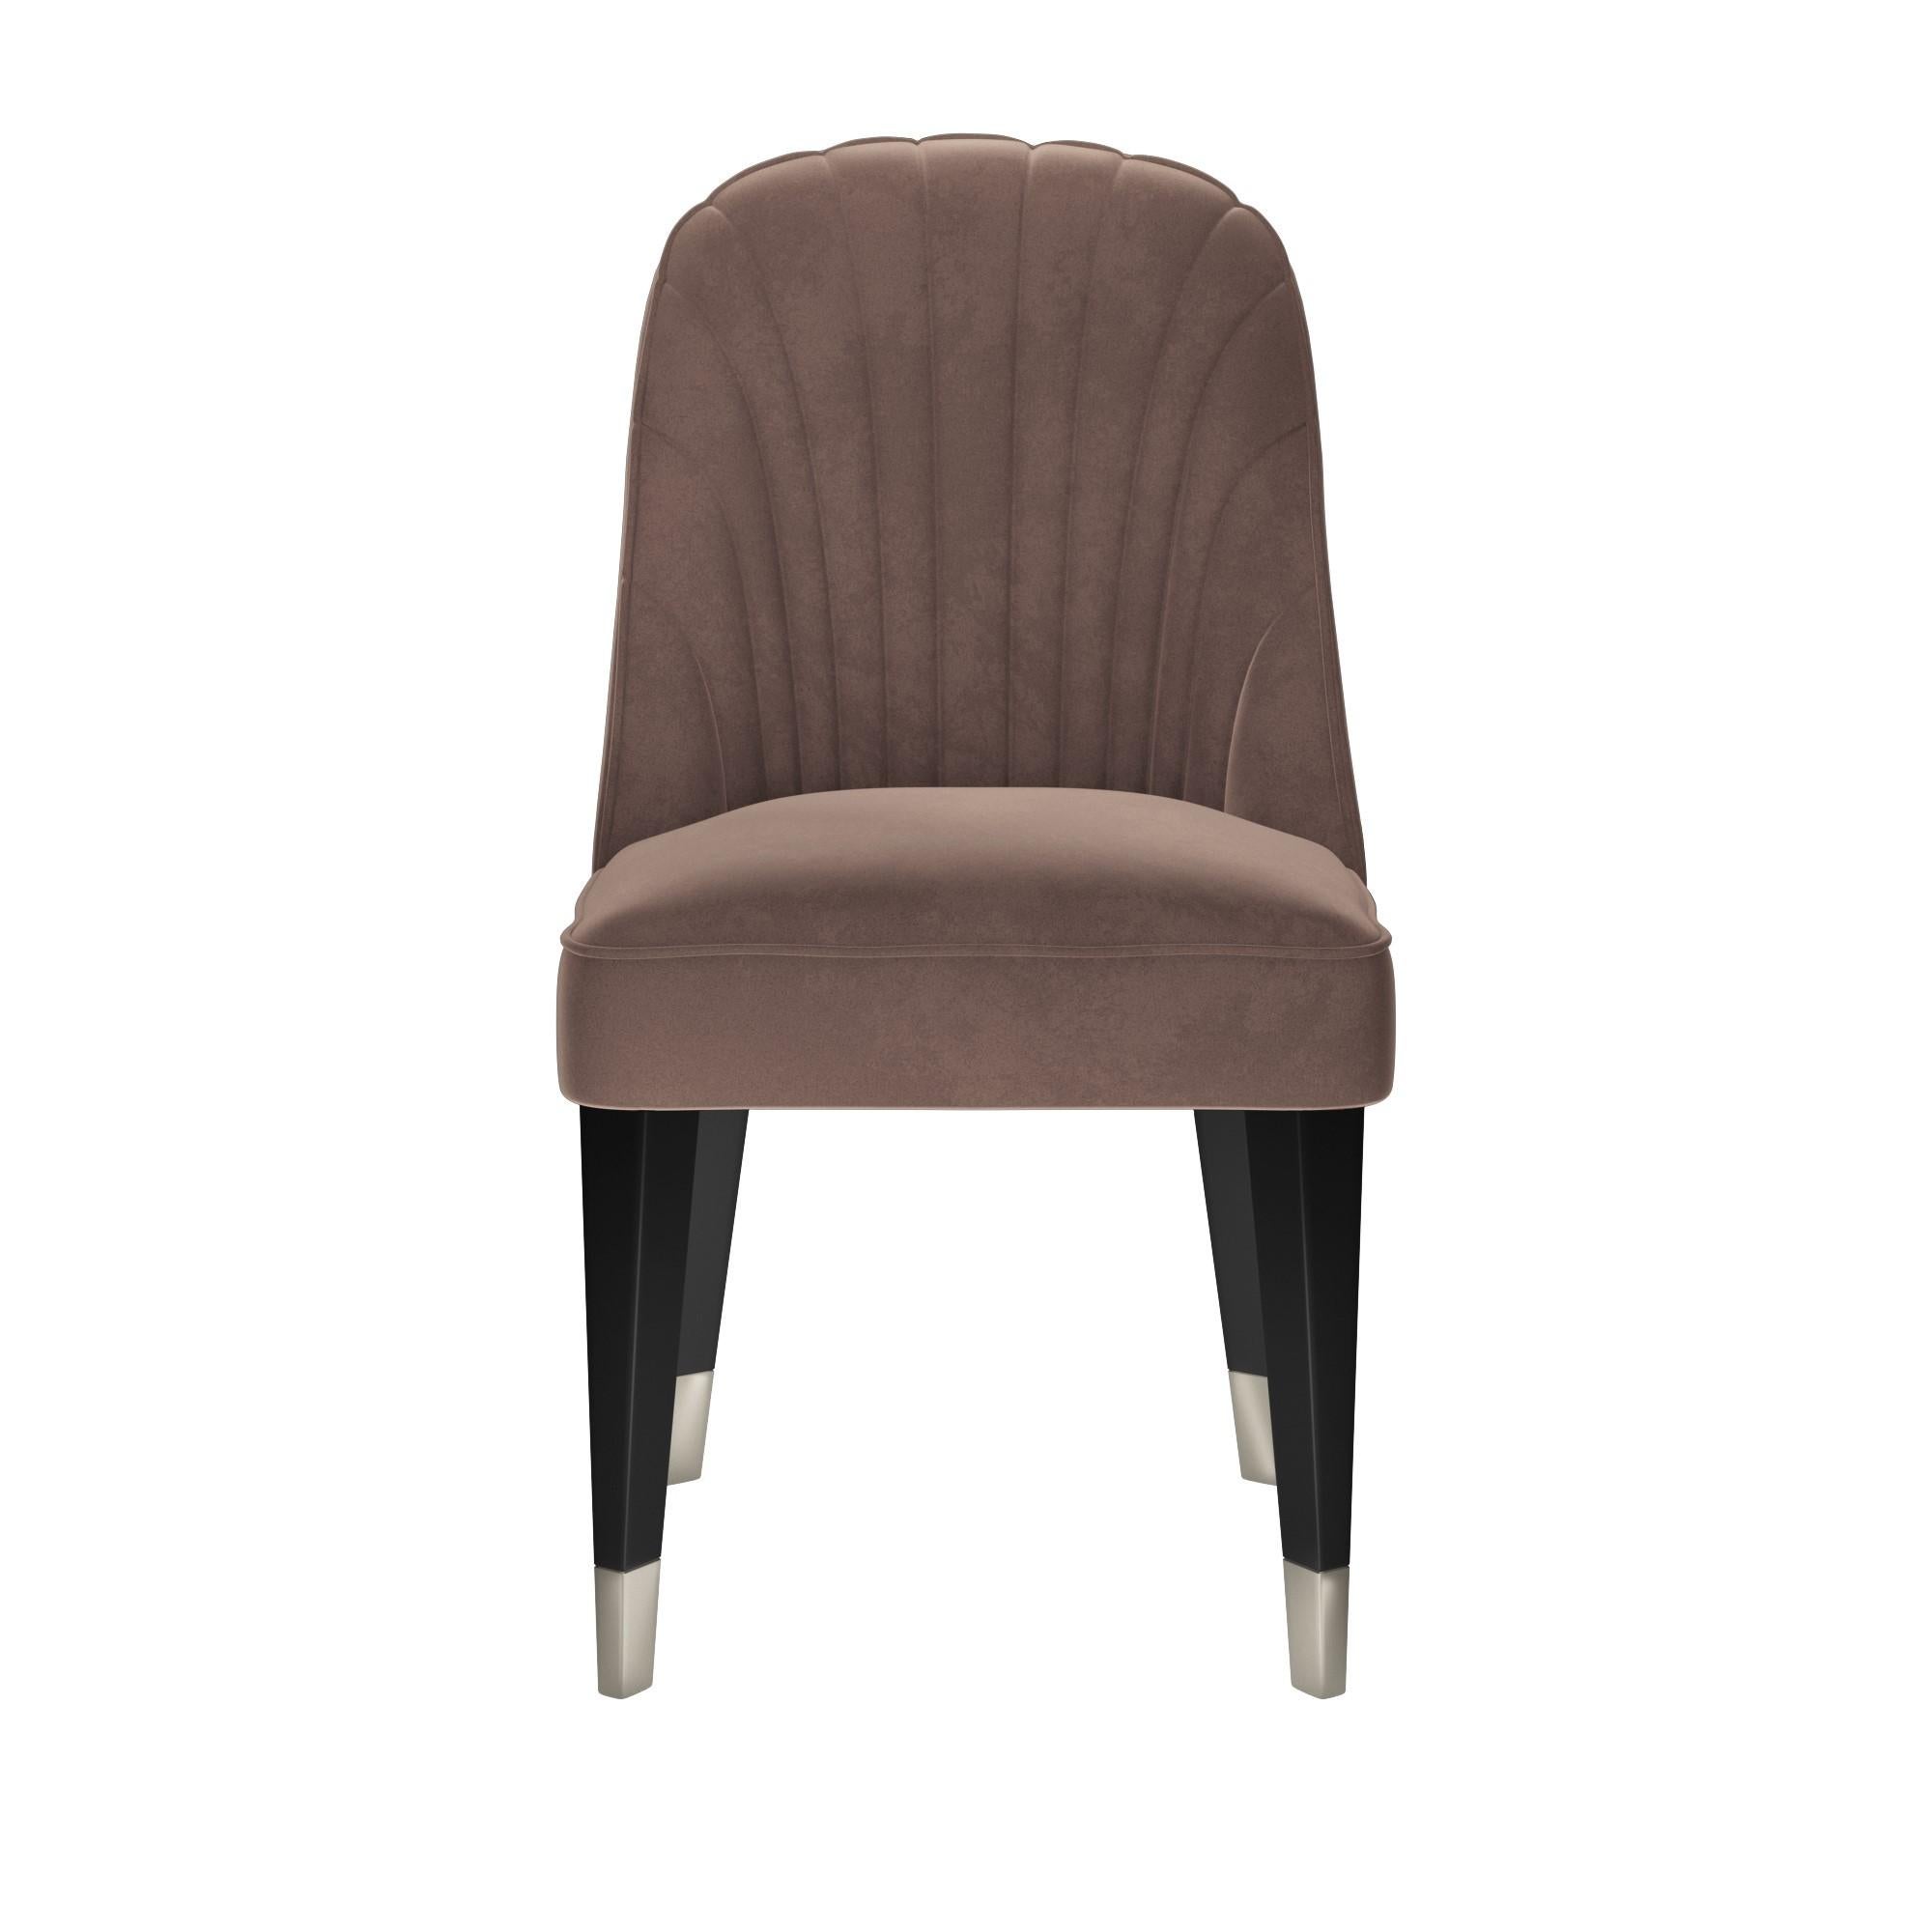 Contemporary dining chair featuring a sculptural curved back with tufted padding to achieve the perfect angle for relaxation. Upholstered in Lavender velvet with very soft alpaca wool look and feel. The velvet is stain resistant and water